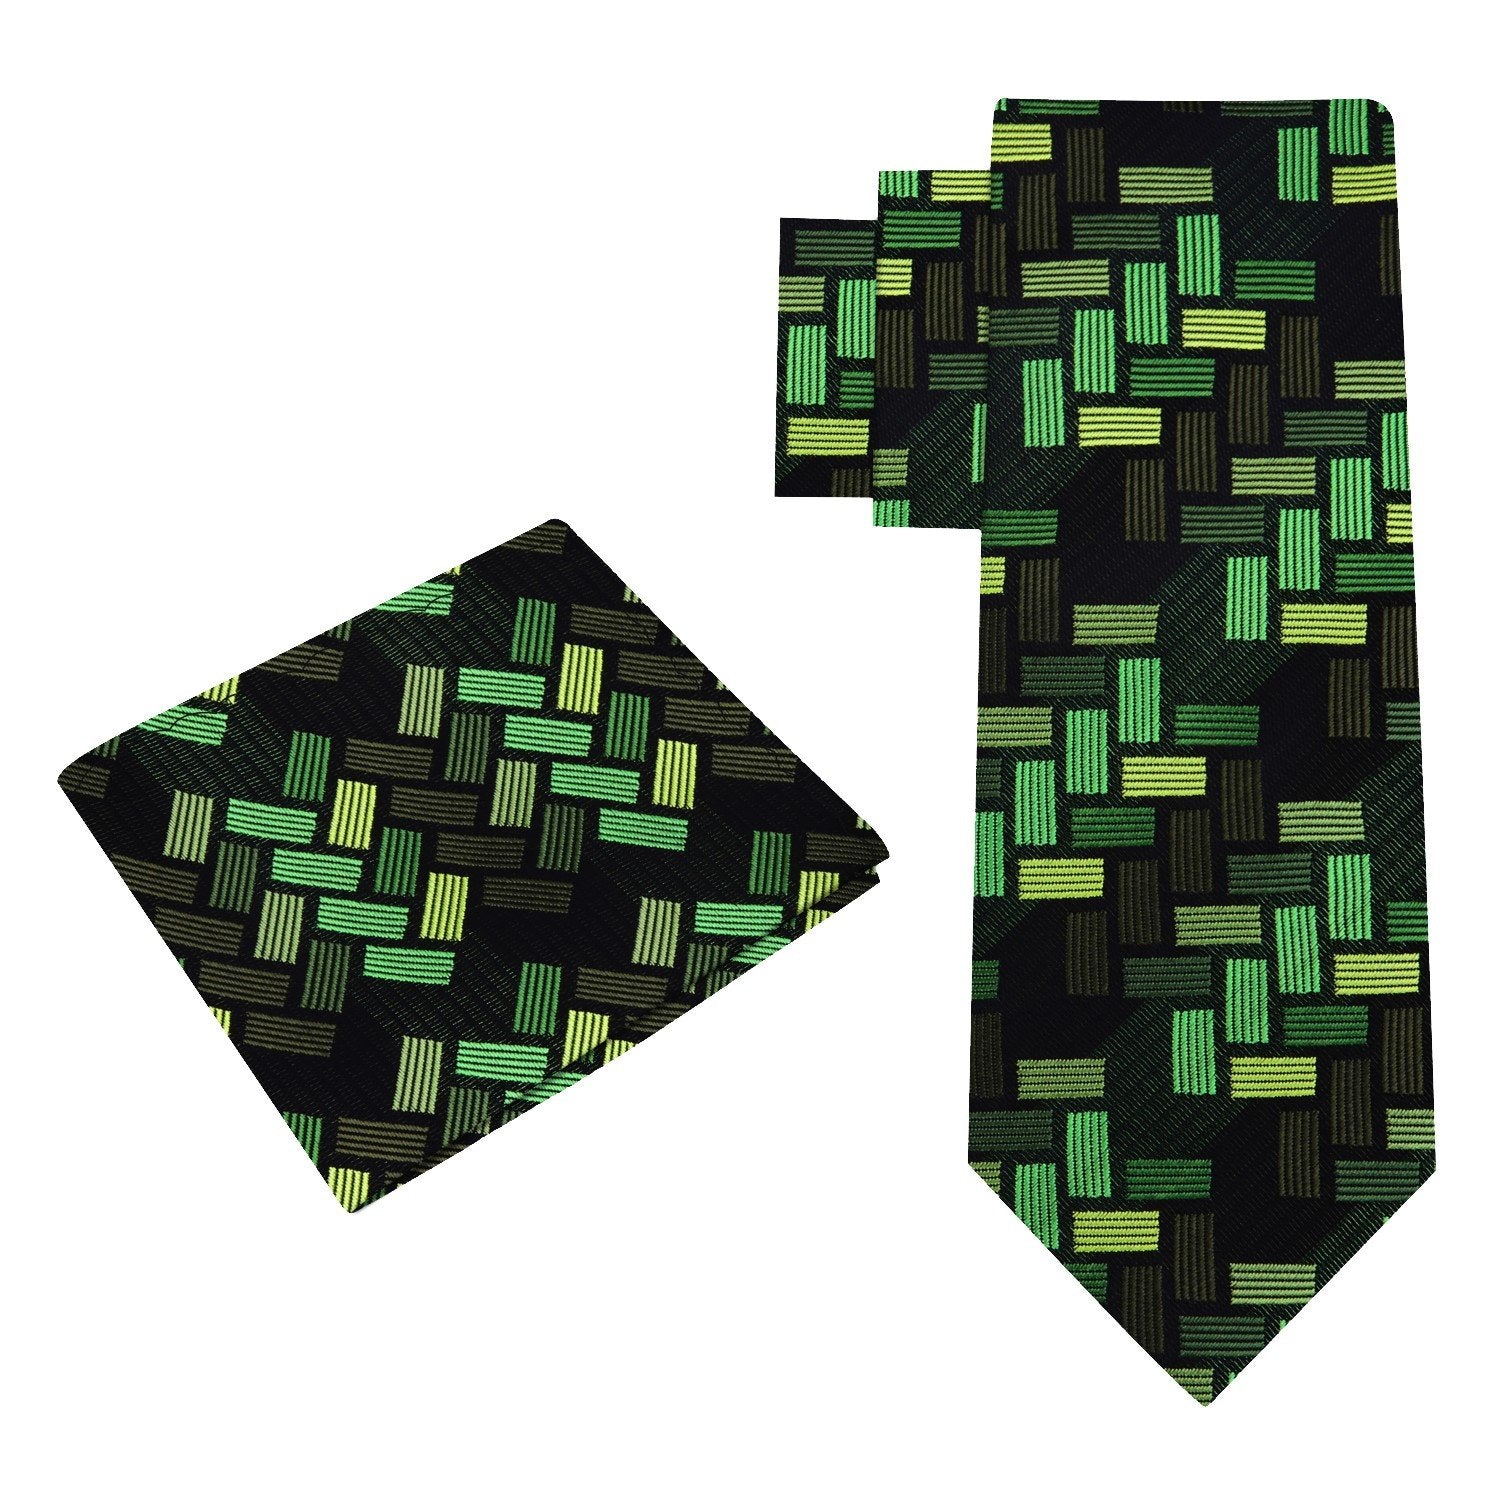 Alt View: Shades of Green Blocks Tie and Pocket Square